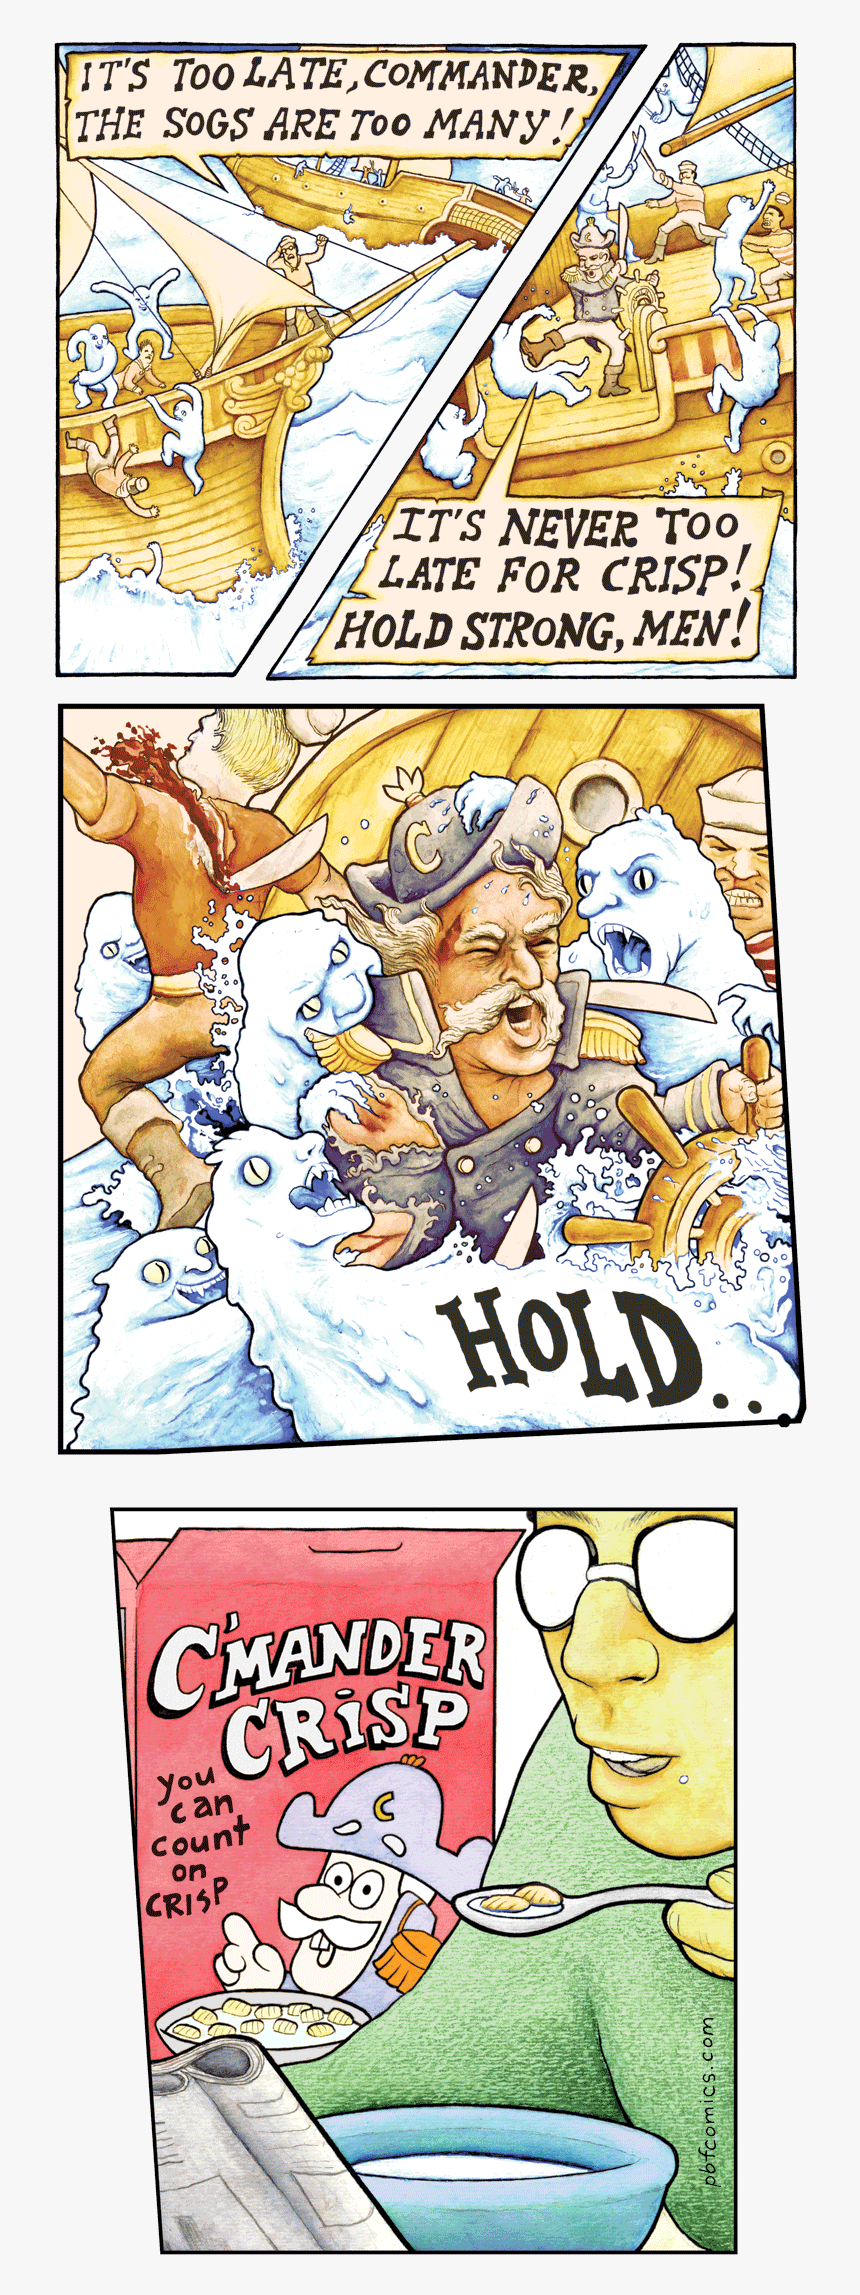 Commander Crisp - Perry Bible Fellowship Songs, HD Png Download, Free Download